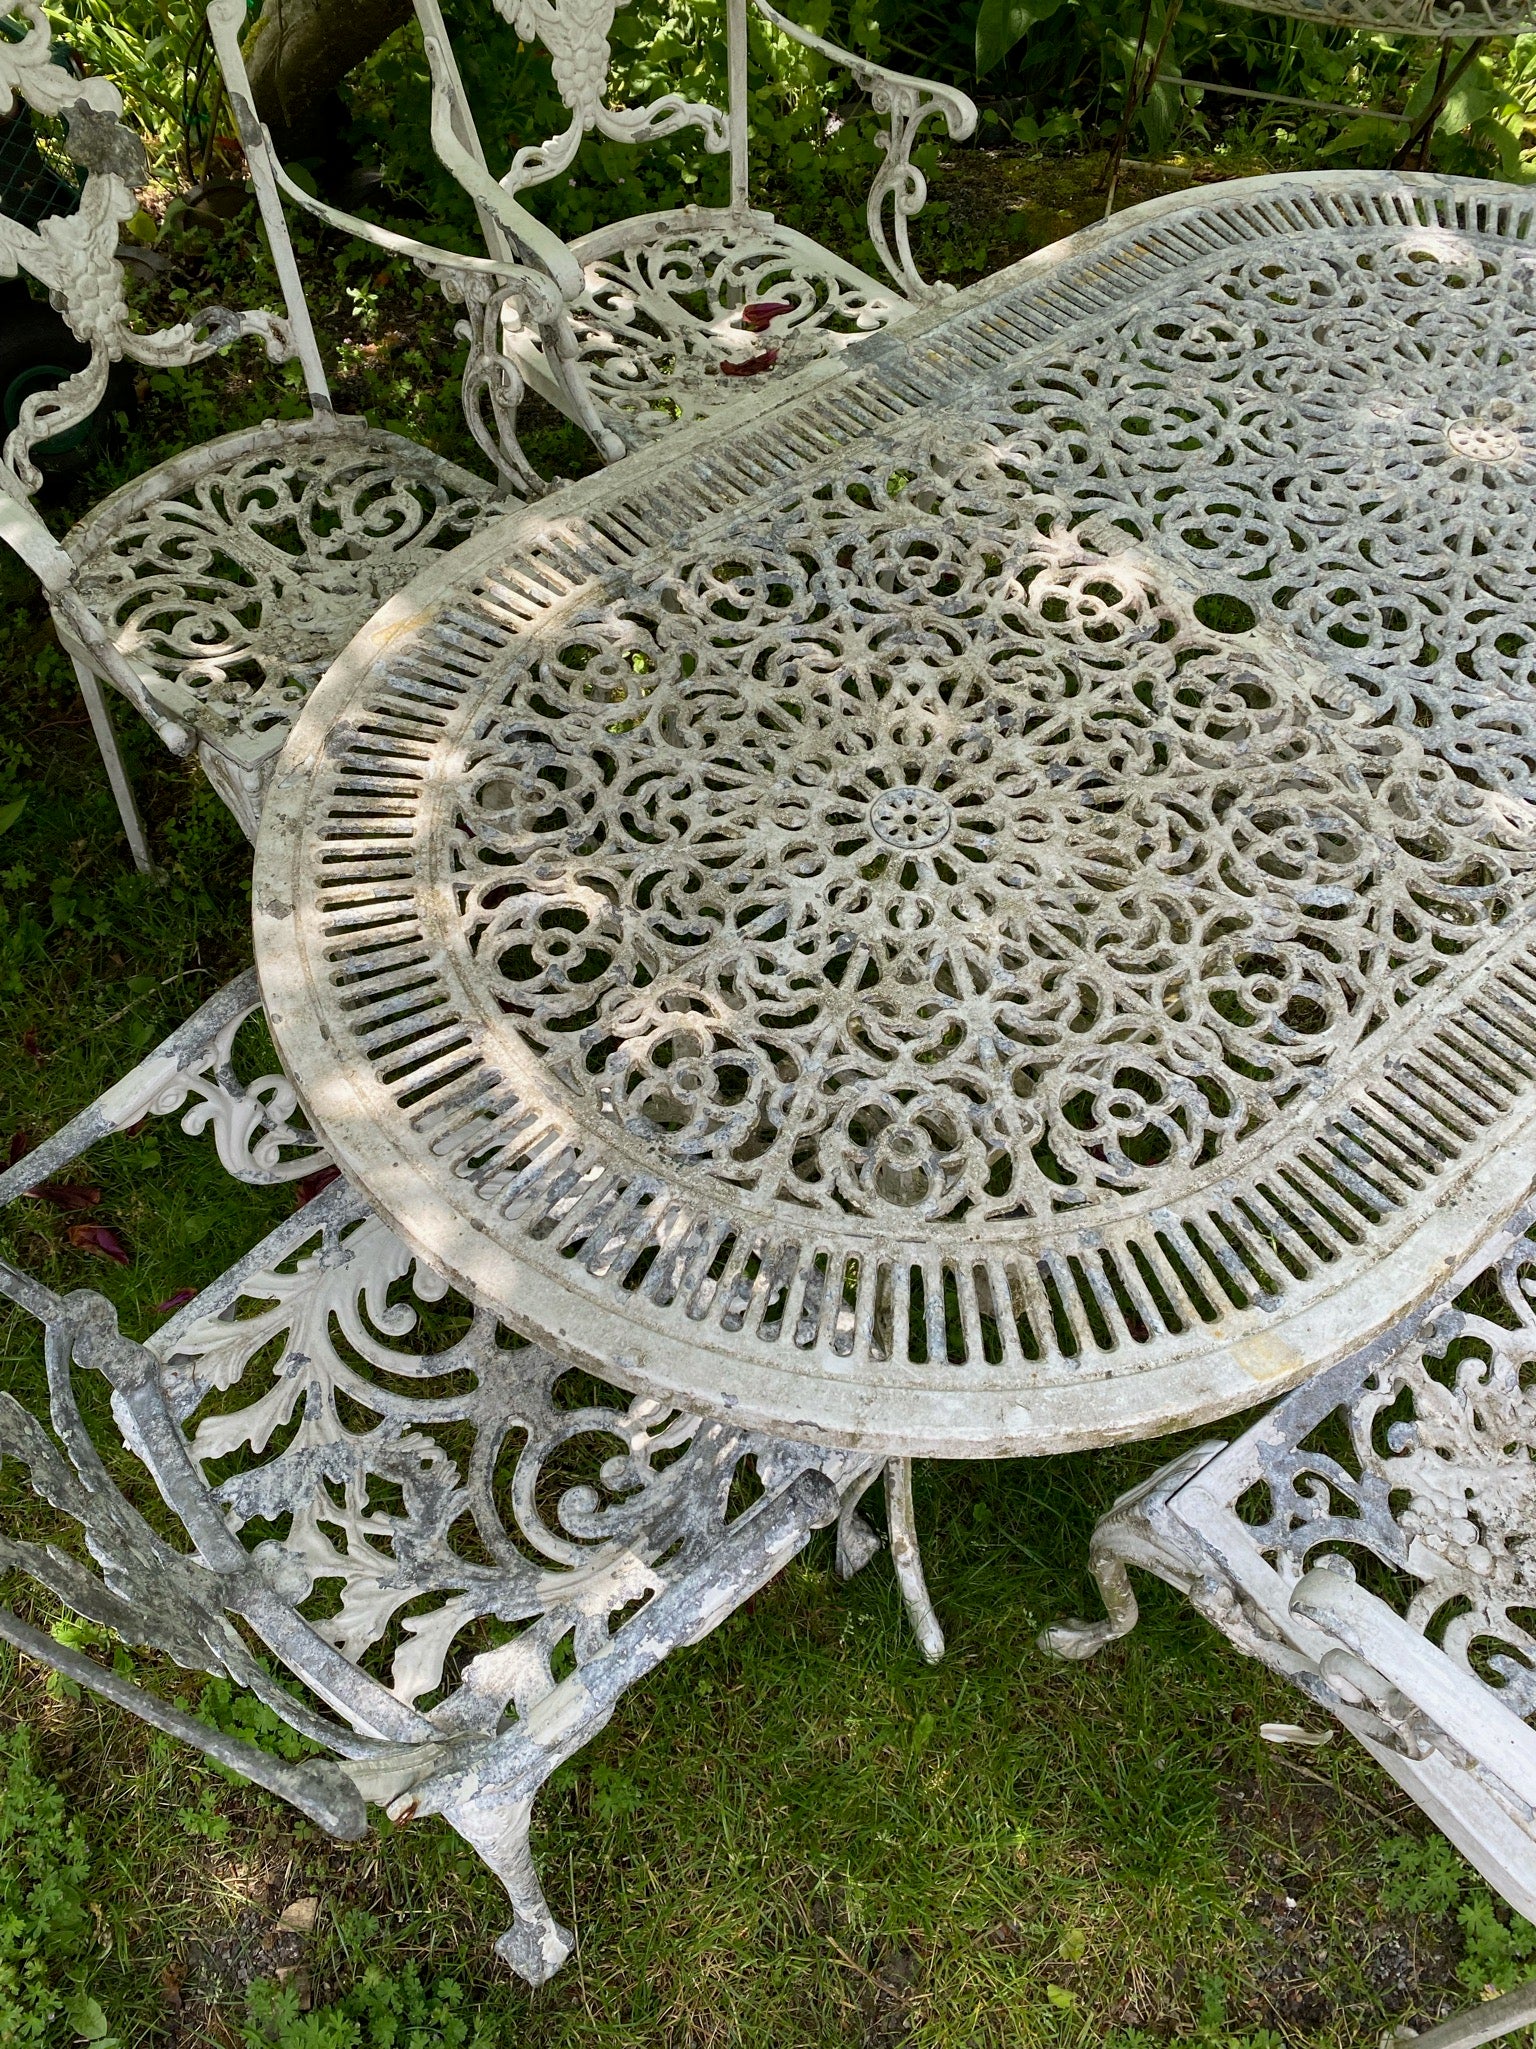 Antique White French Cast Aluminium Table & Chairs